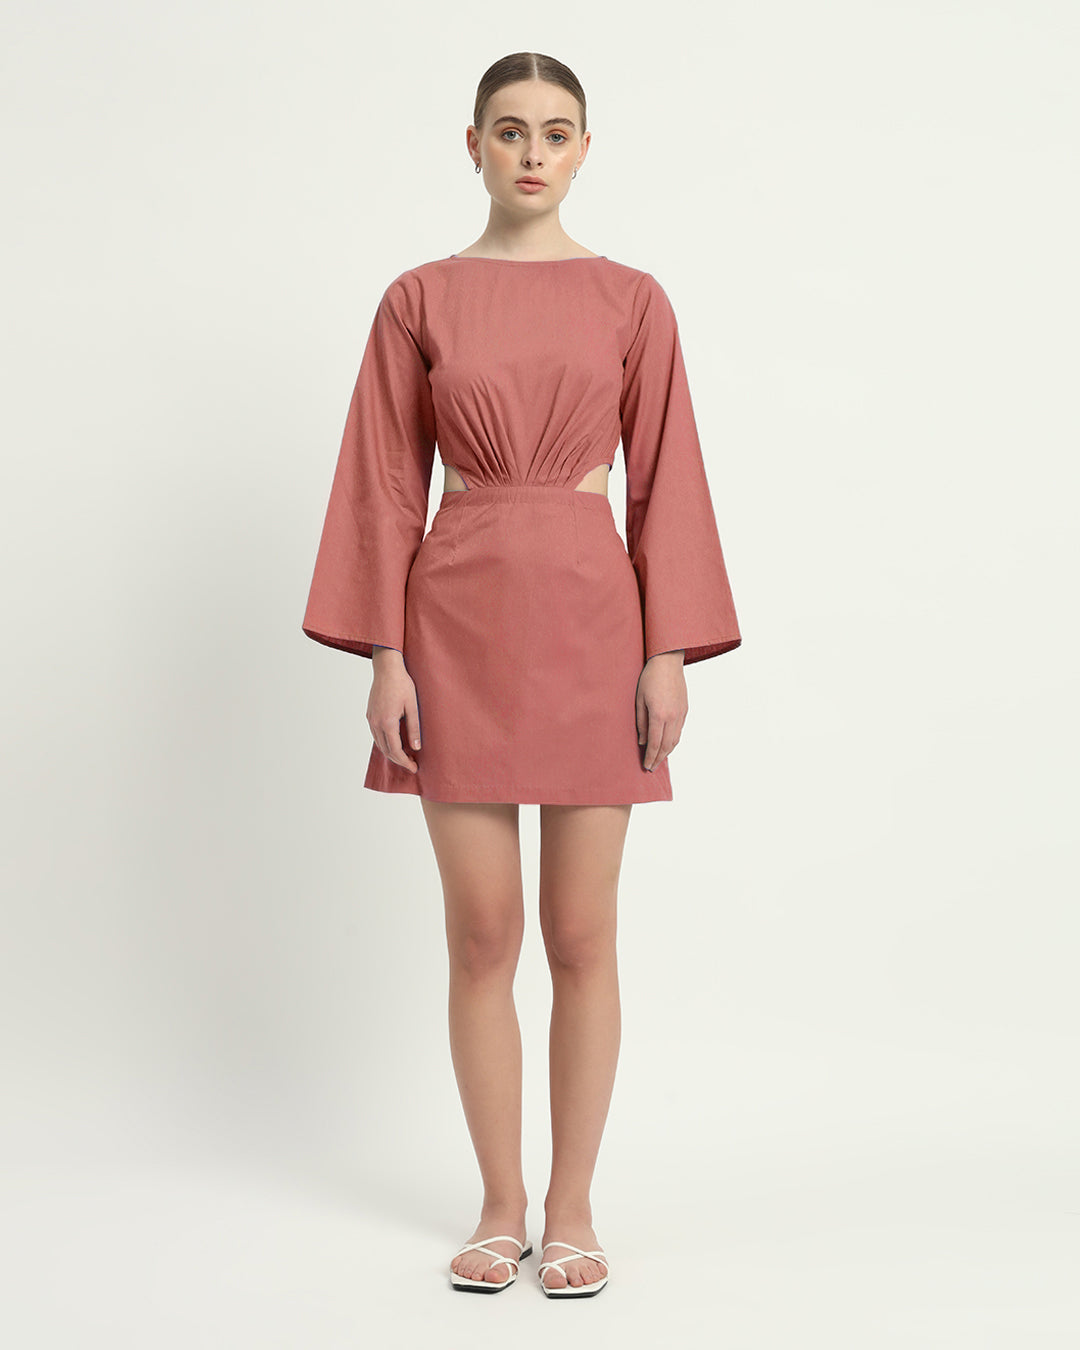 The Eloy  Ivory Pink Cotton Dress